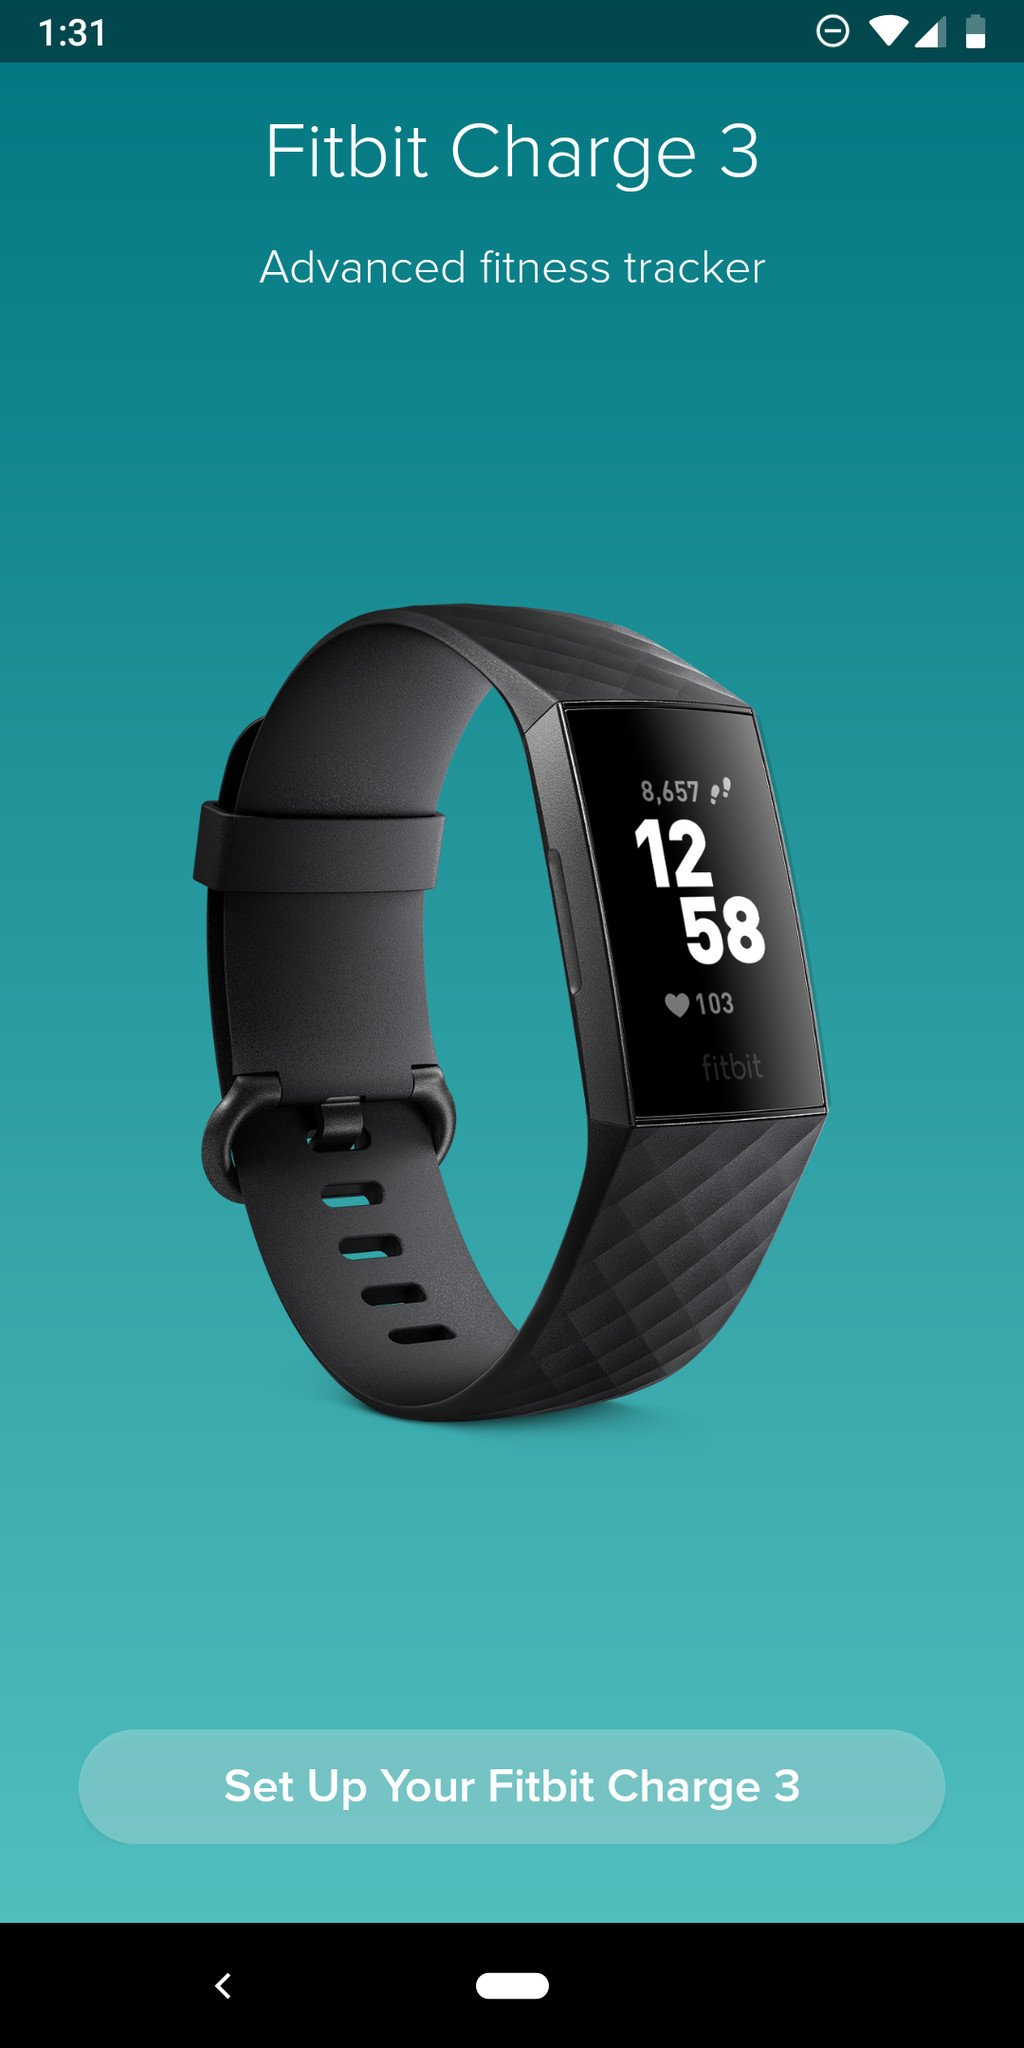 How to set up a new Fitbit Charge 3 for 